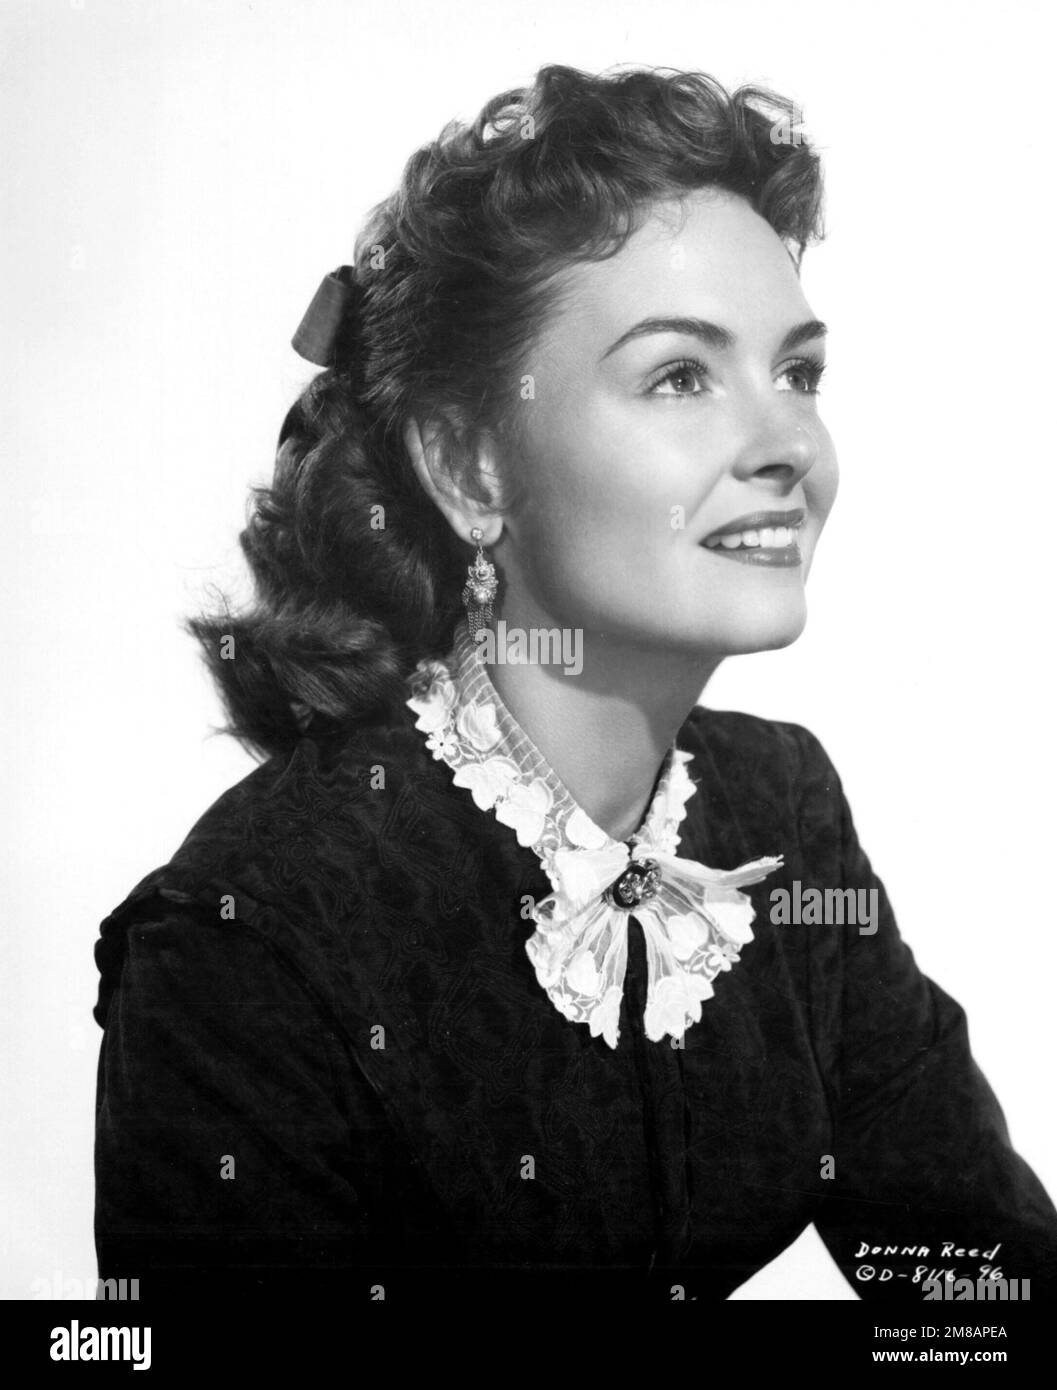 DONNA REED in HANGMAN'S KNOT (1952), directed by ROY HUGGINS. Credit: COLUMBIA PICTURES / Album Stock Photo